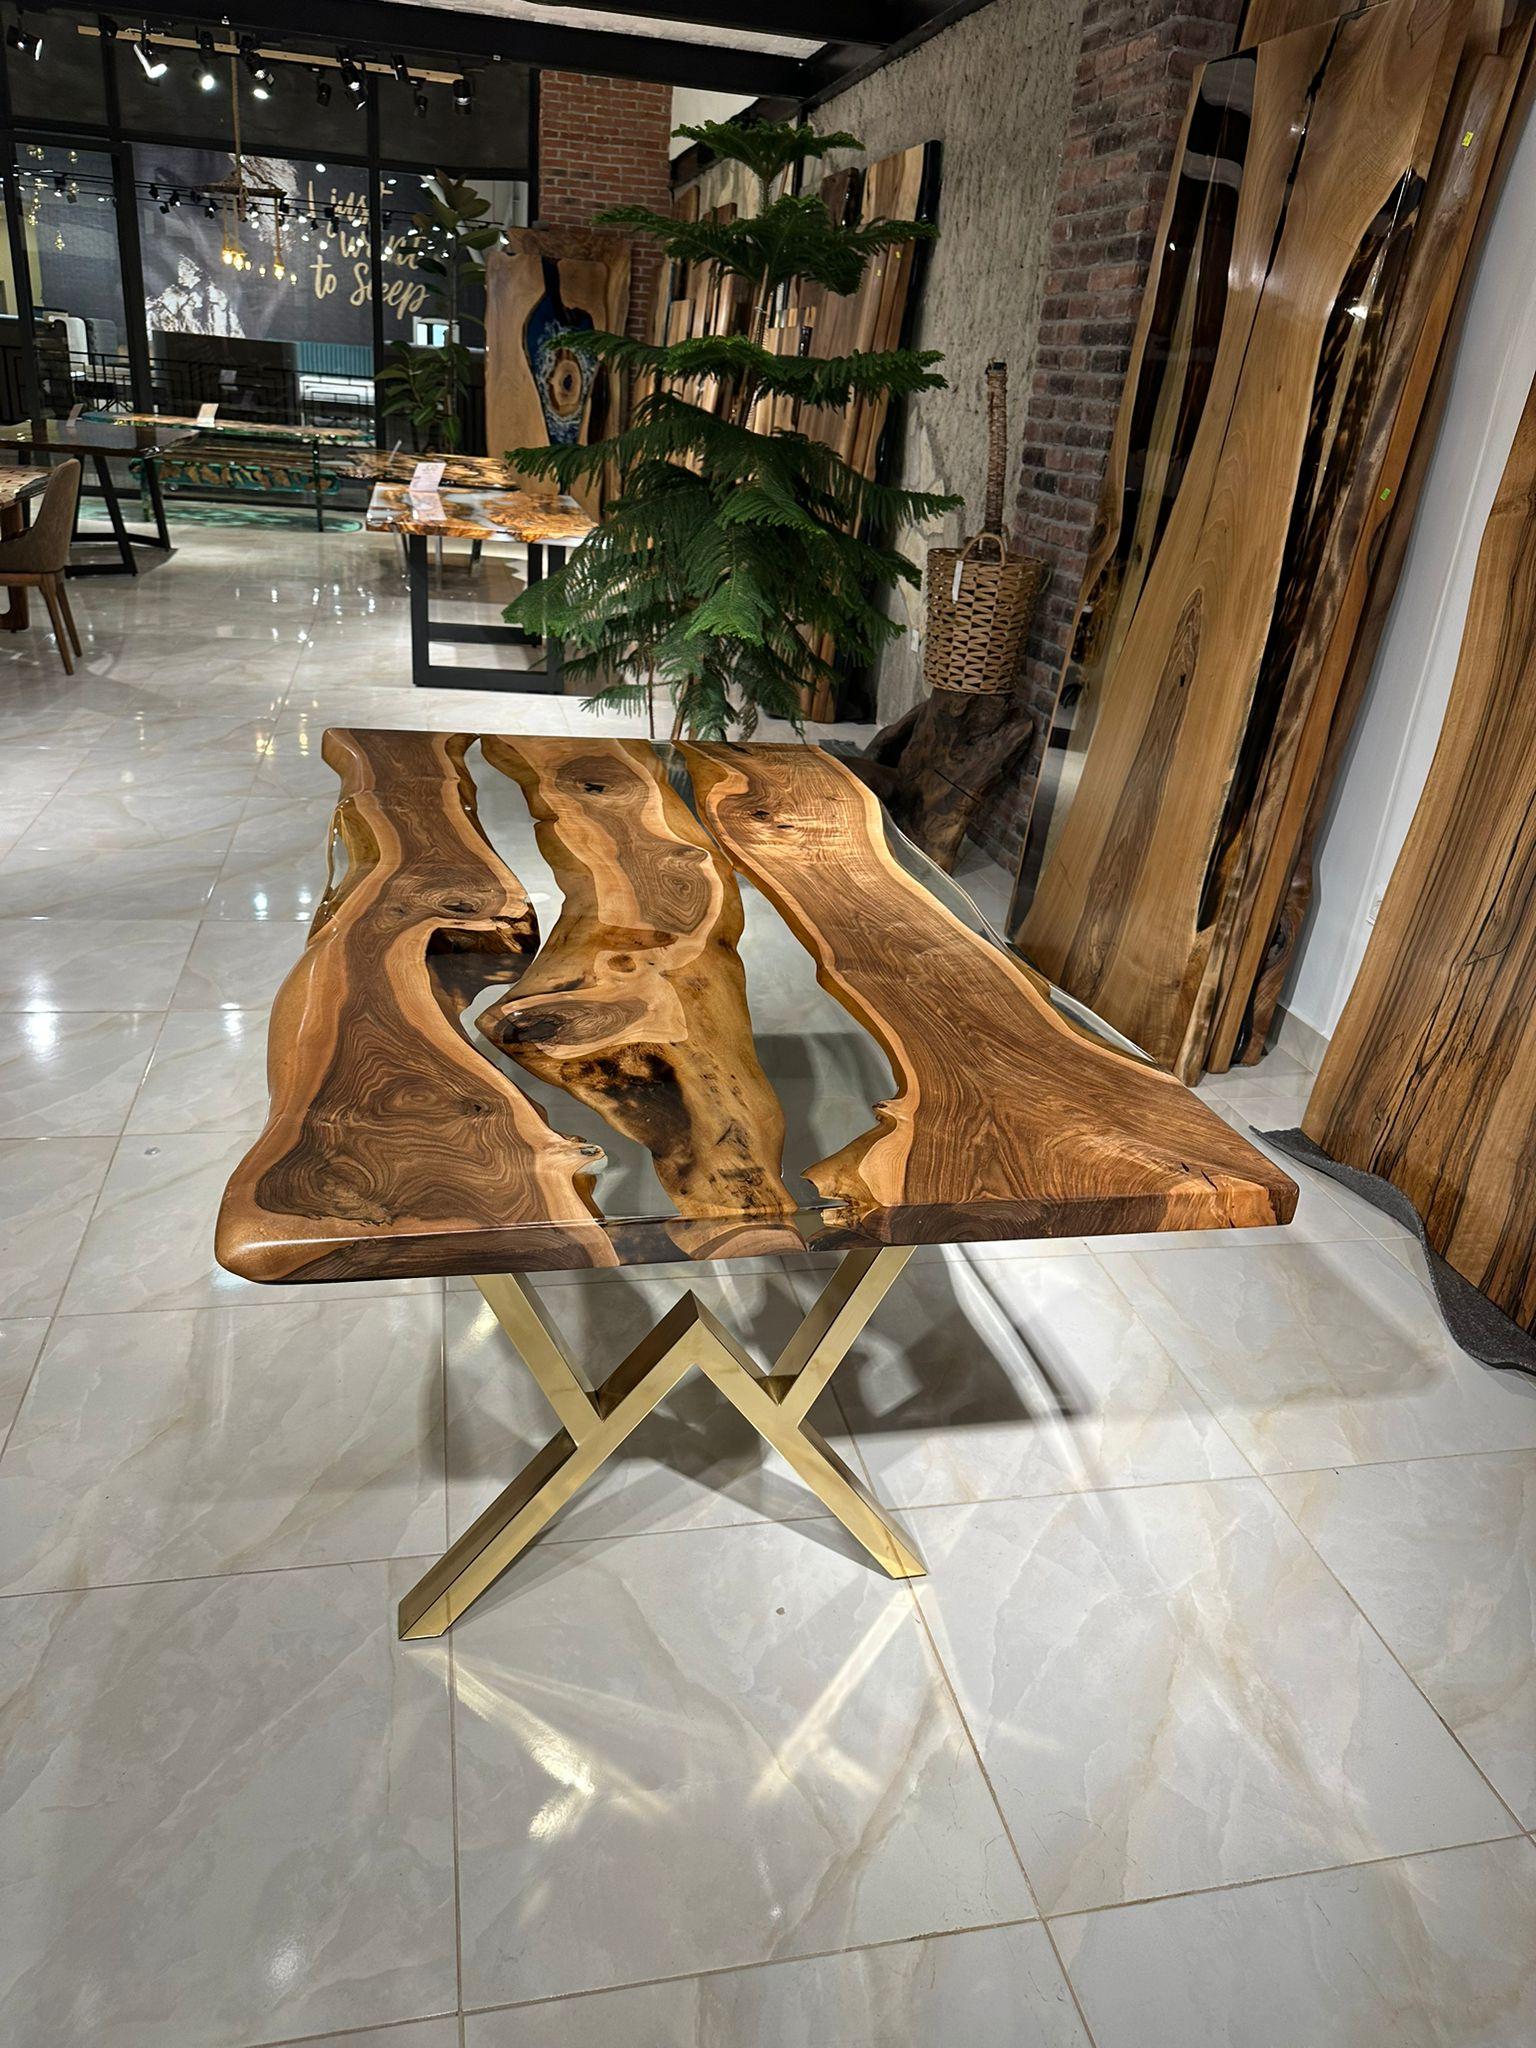 Black Walnut Ultra Clear Epoxy Resin Dining Table 

This table is made of 500 years old Walnut Wood. The grains and texture of the wood describe what a natural walnut woods looks like.
It can be used as a dining table or as a conference table.